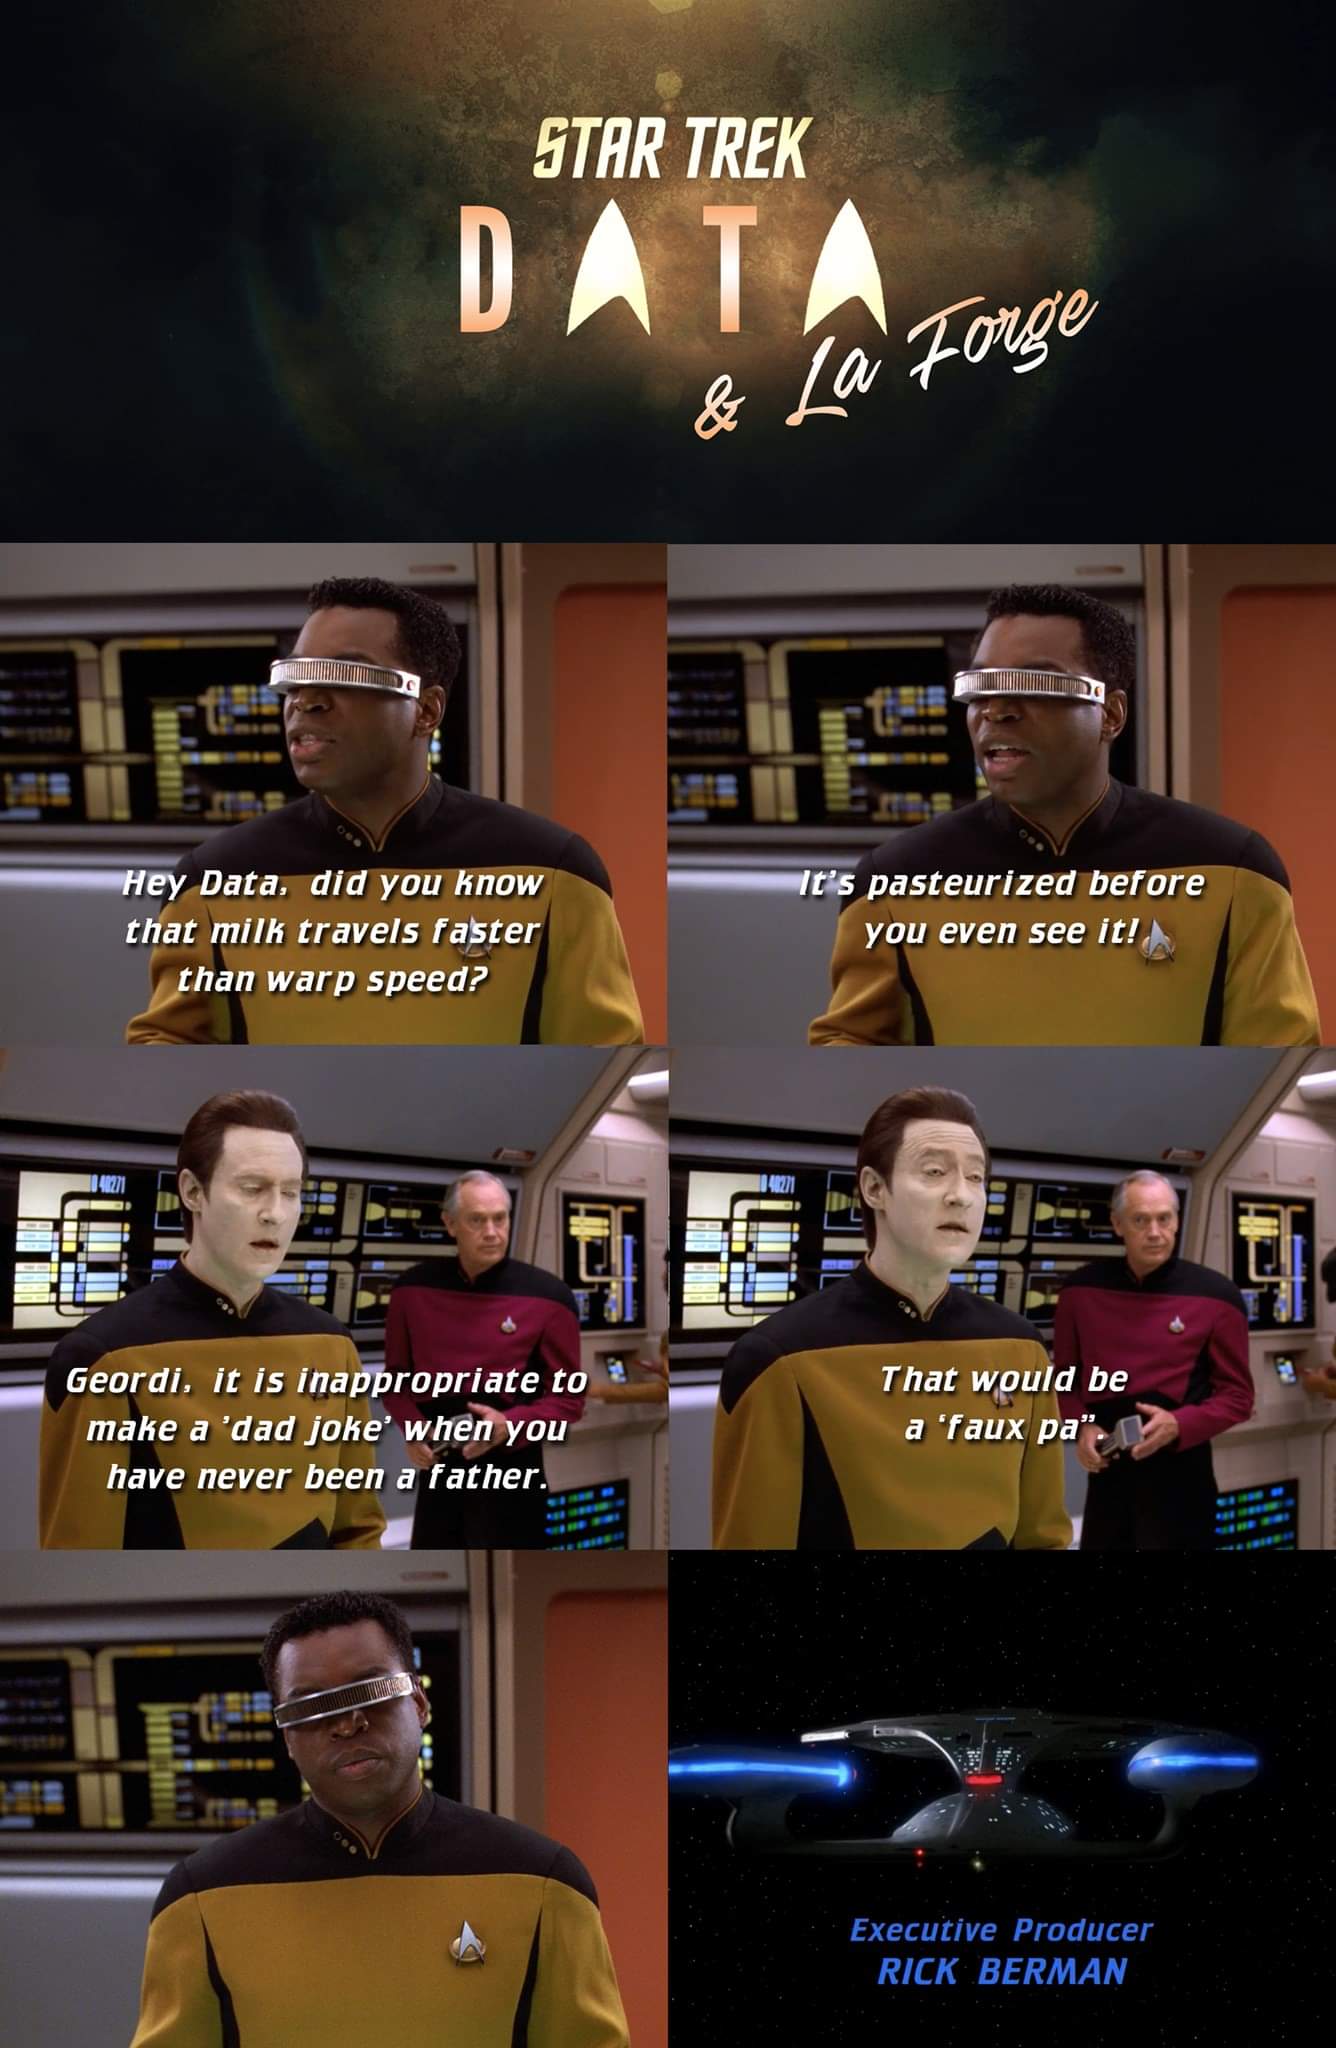 Star Trek Forge & La Hey Data, did you know that milk travels faster than warp speed? It's pasteurized before you even see it! Geordi, it is inappropriate to make a 'dad joke' when you have never been a father. That would be a 'faux pa. Executive Producer